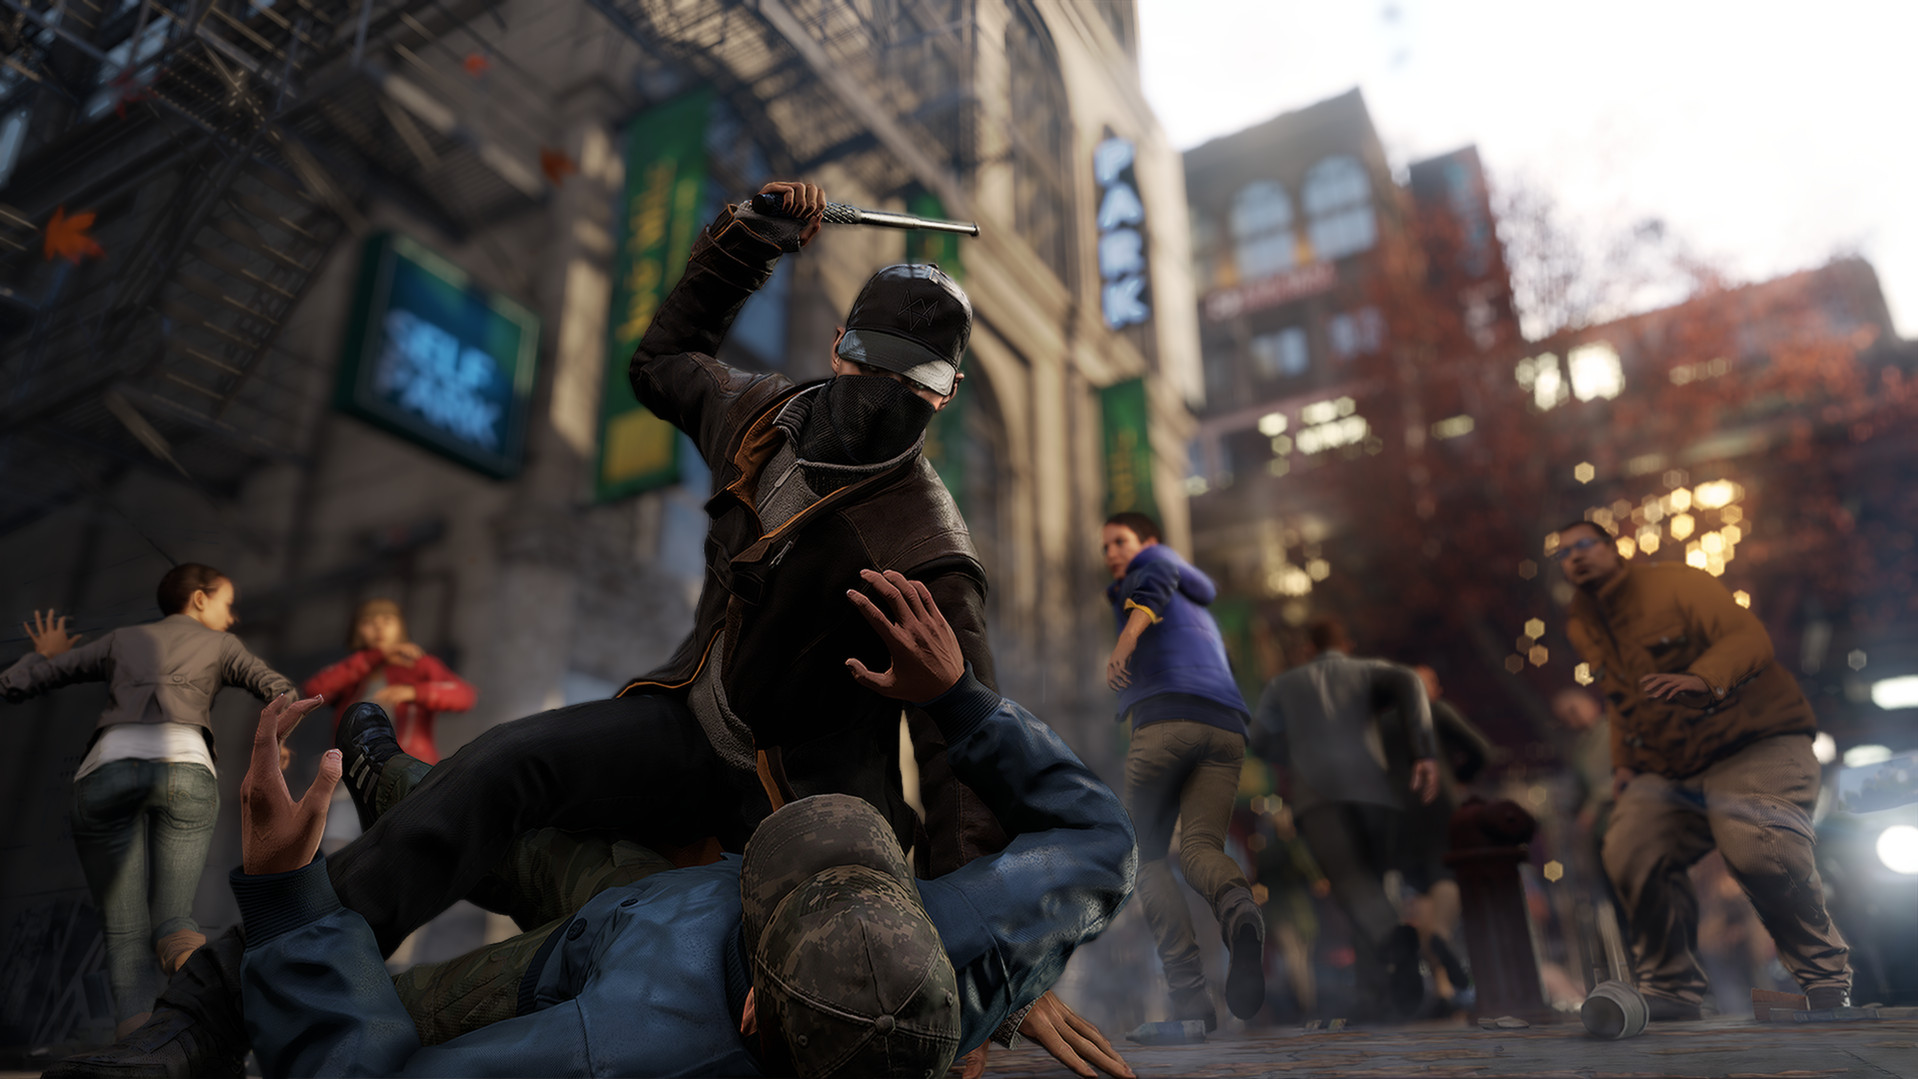 Watch dogs 1, 2, and 3 are on sale over on Steam : r/watch_dogs